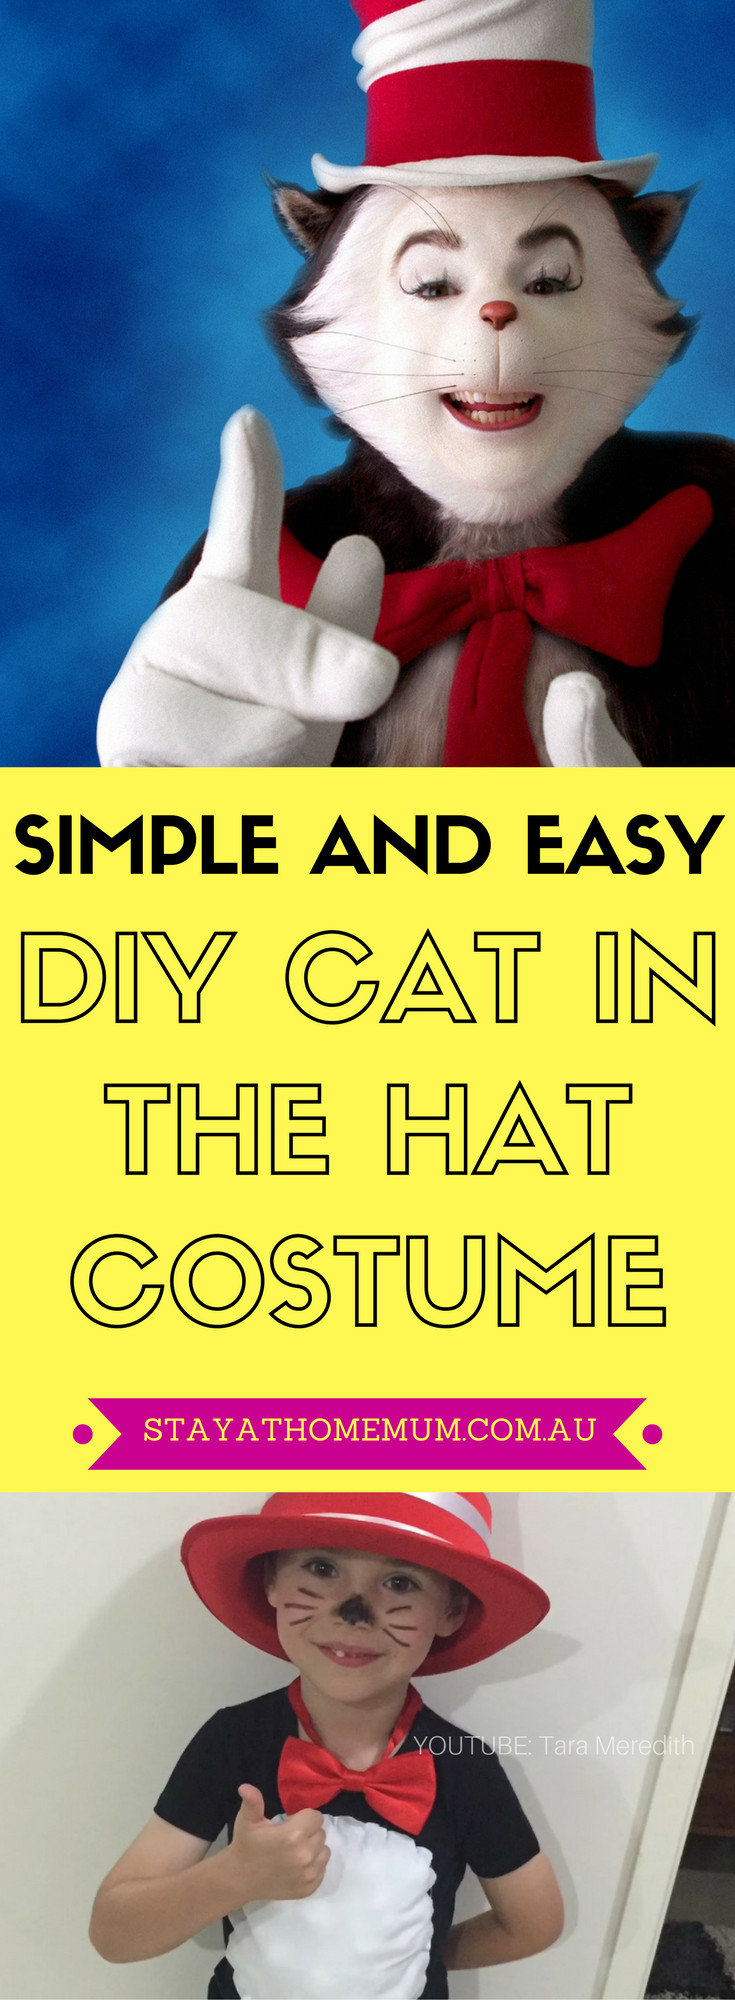 DIY Cat In The Hat Costume
 Simple And Easy DIY Cat In The Hat Costume Stay at Home Mum